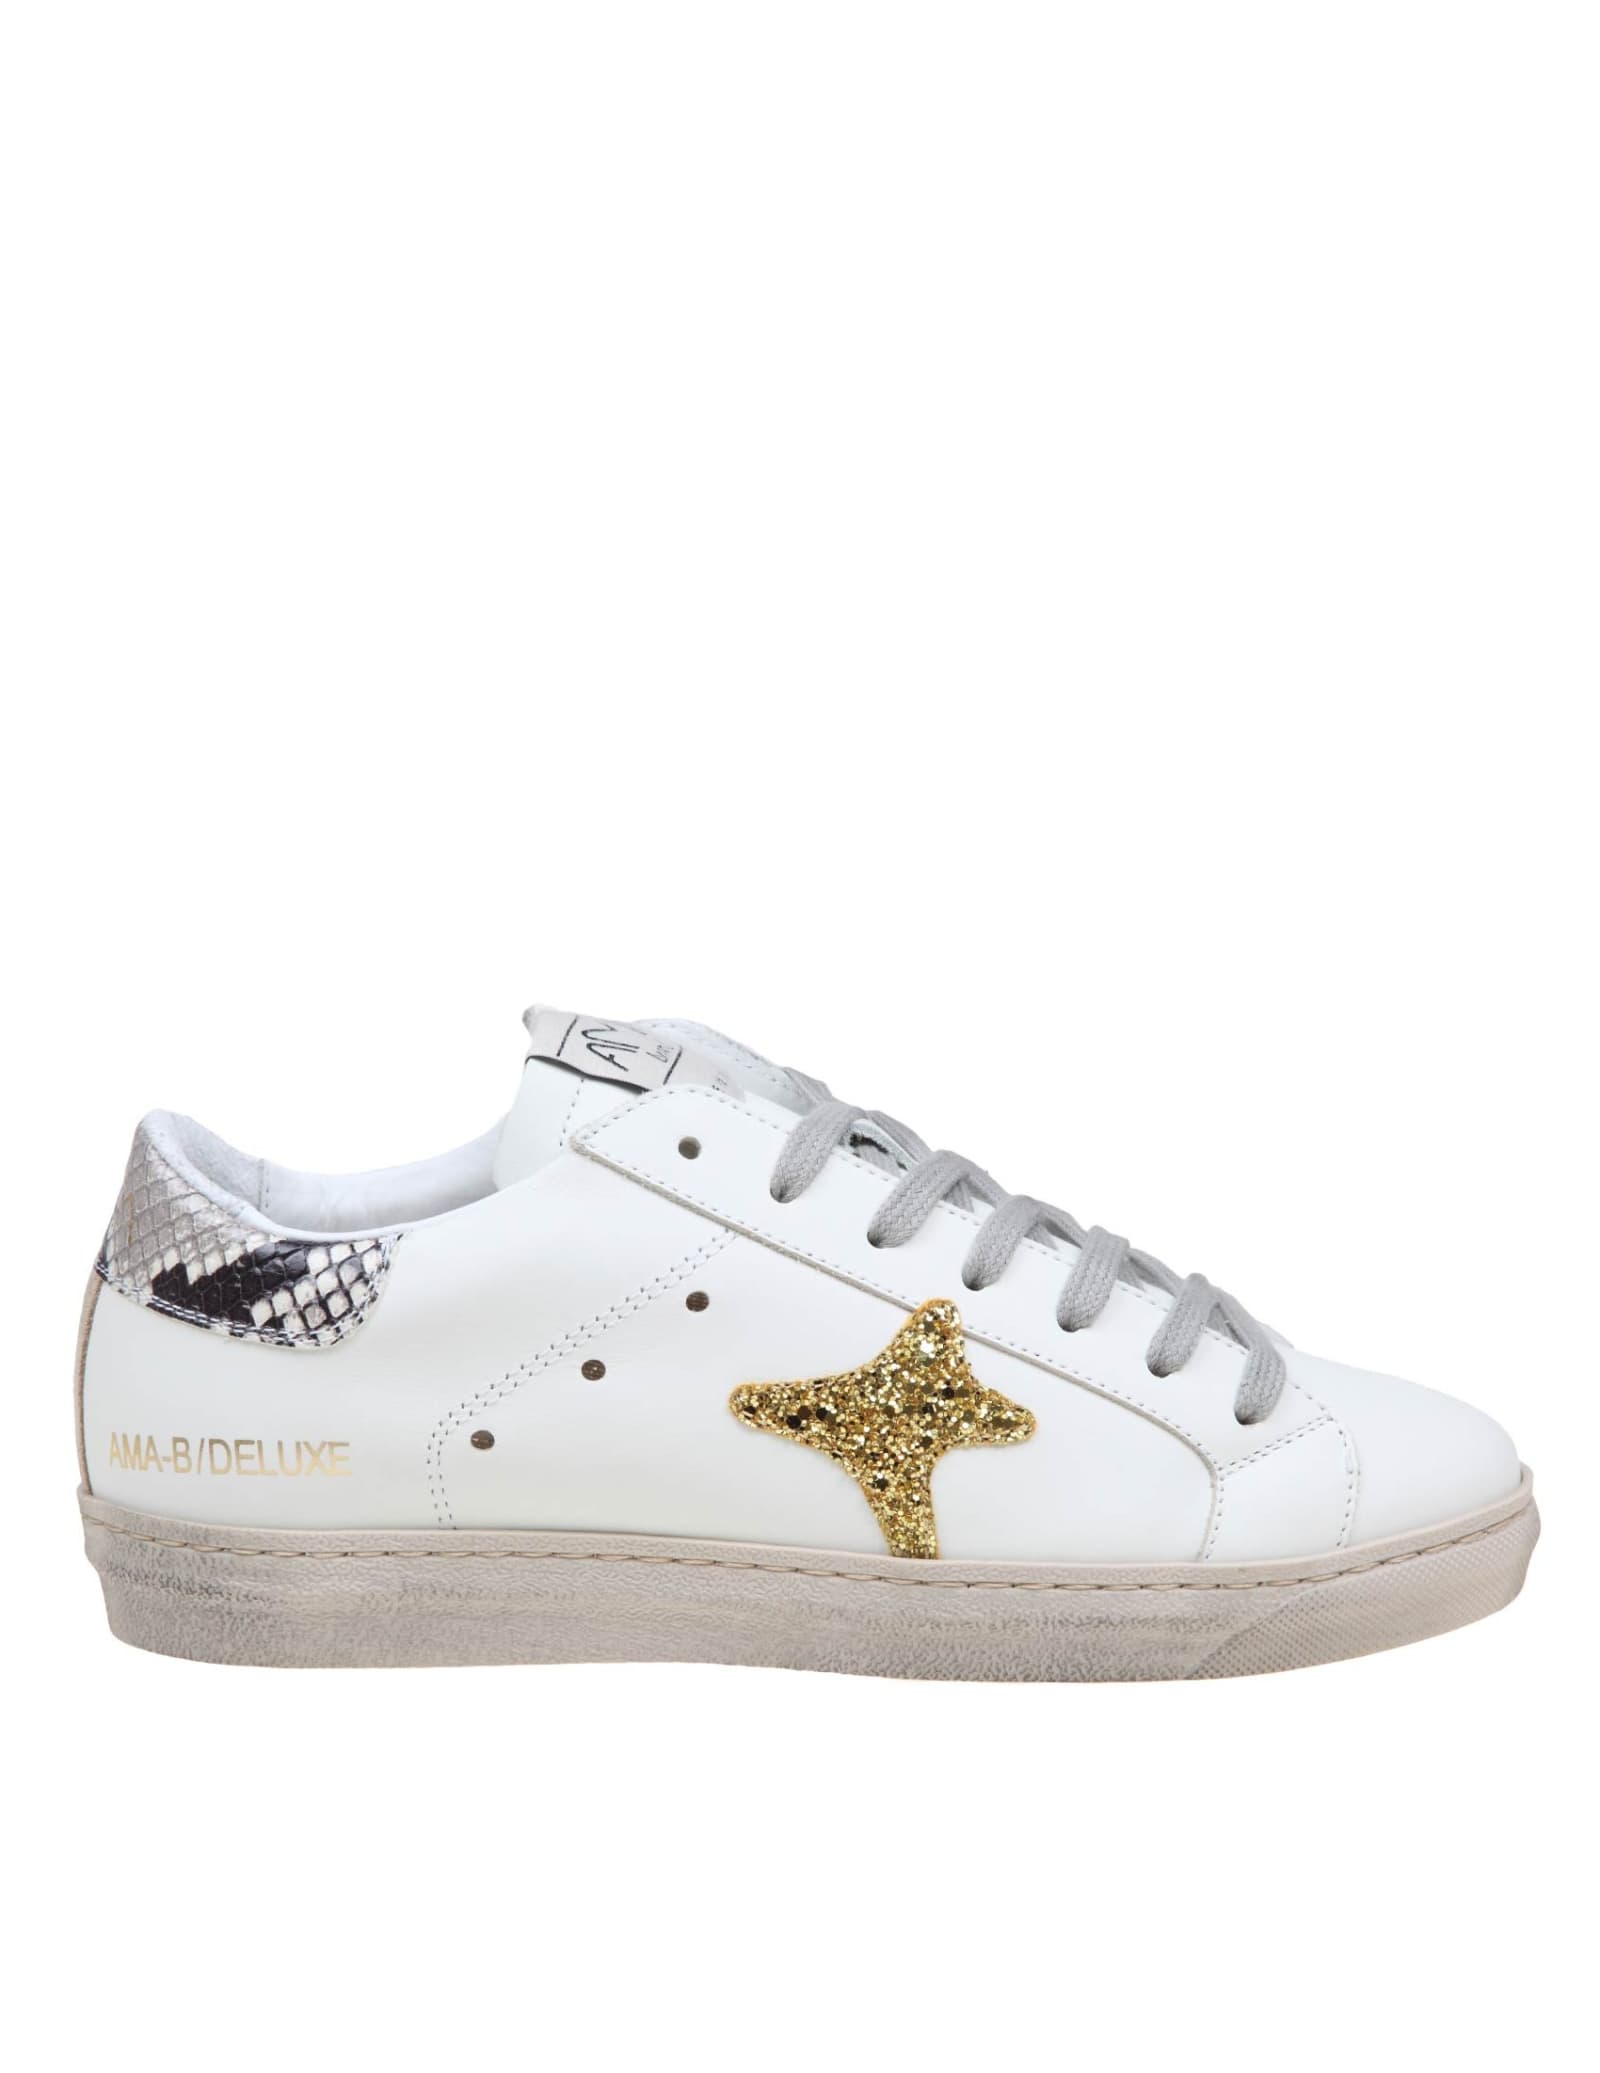 Sneakers In White Leather And Gold Glitter